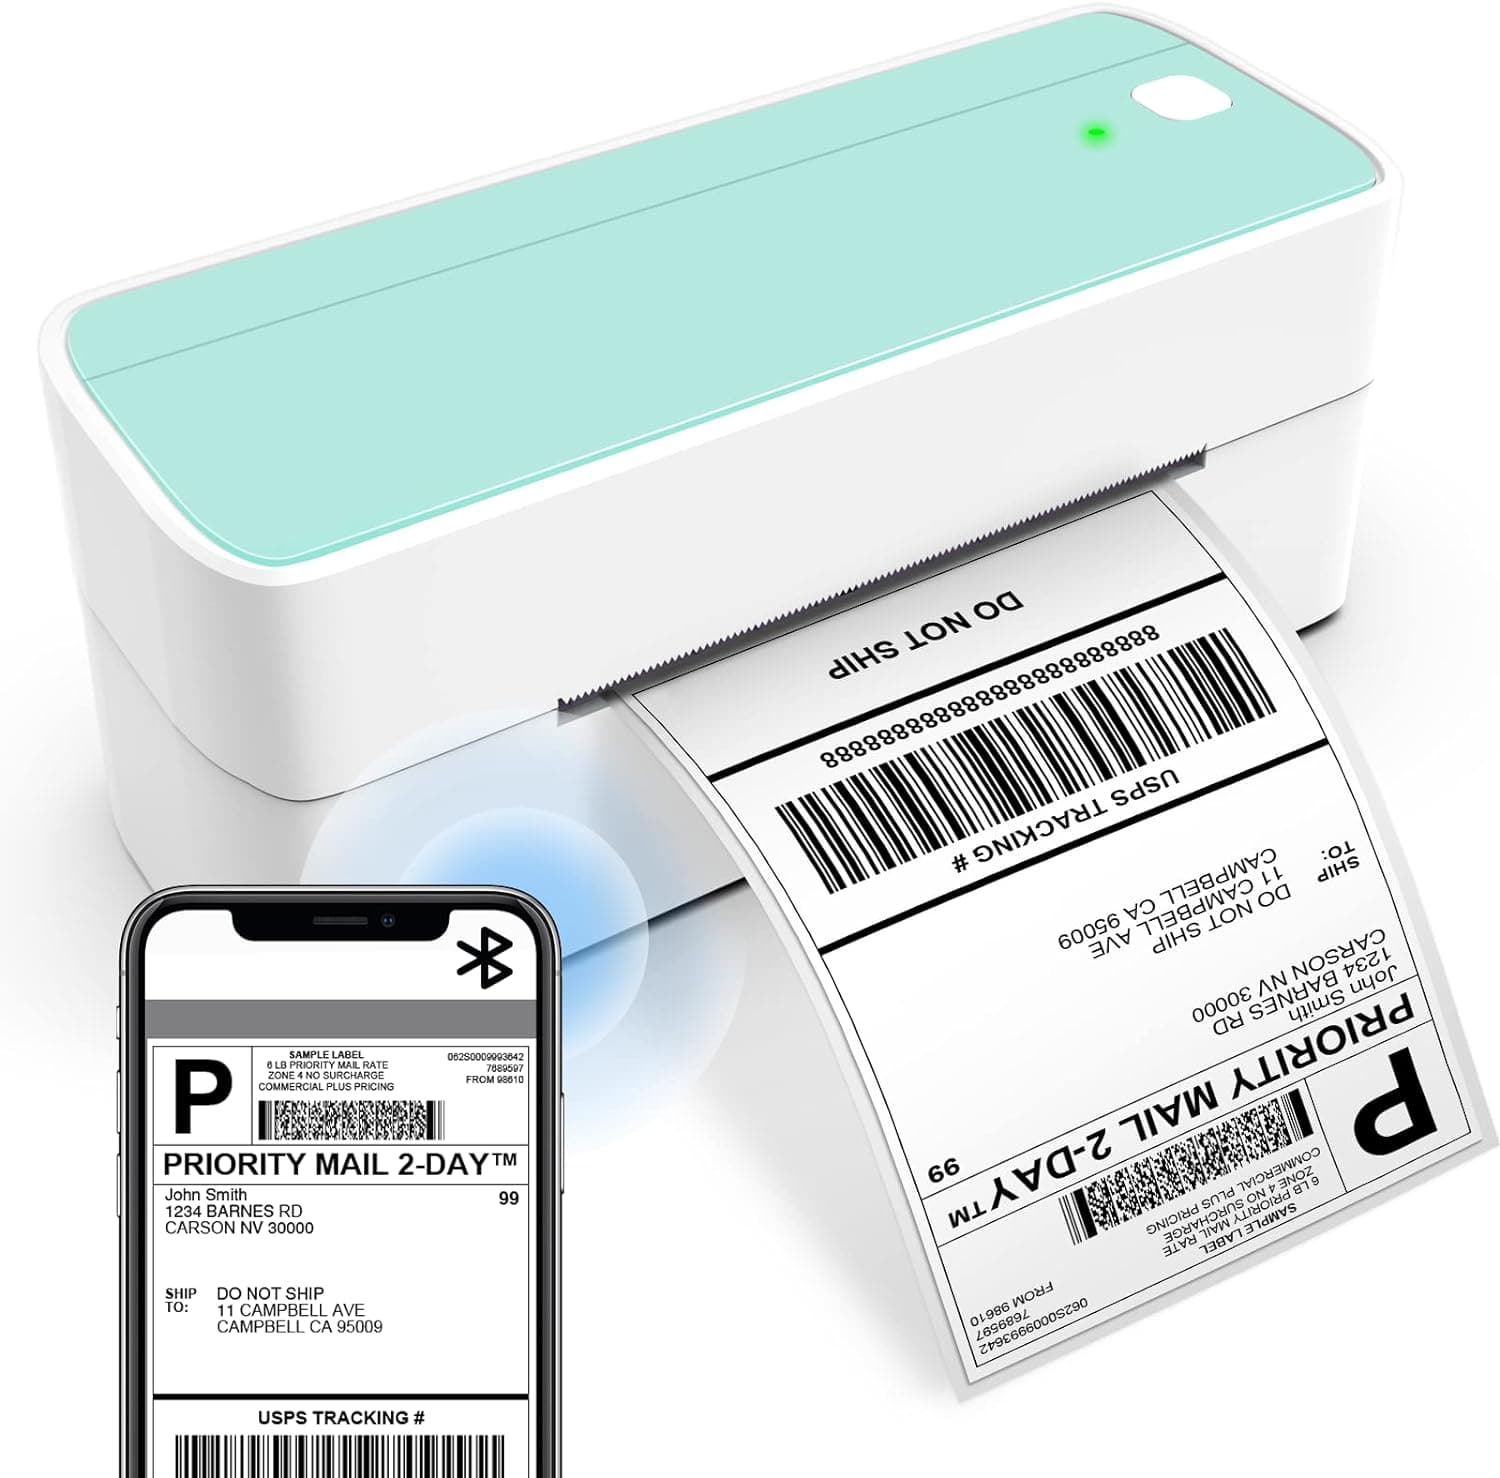  Phomemo 241bt Bluetooth Thermal Shipping Label